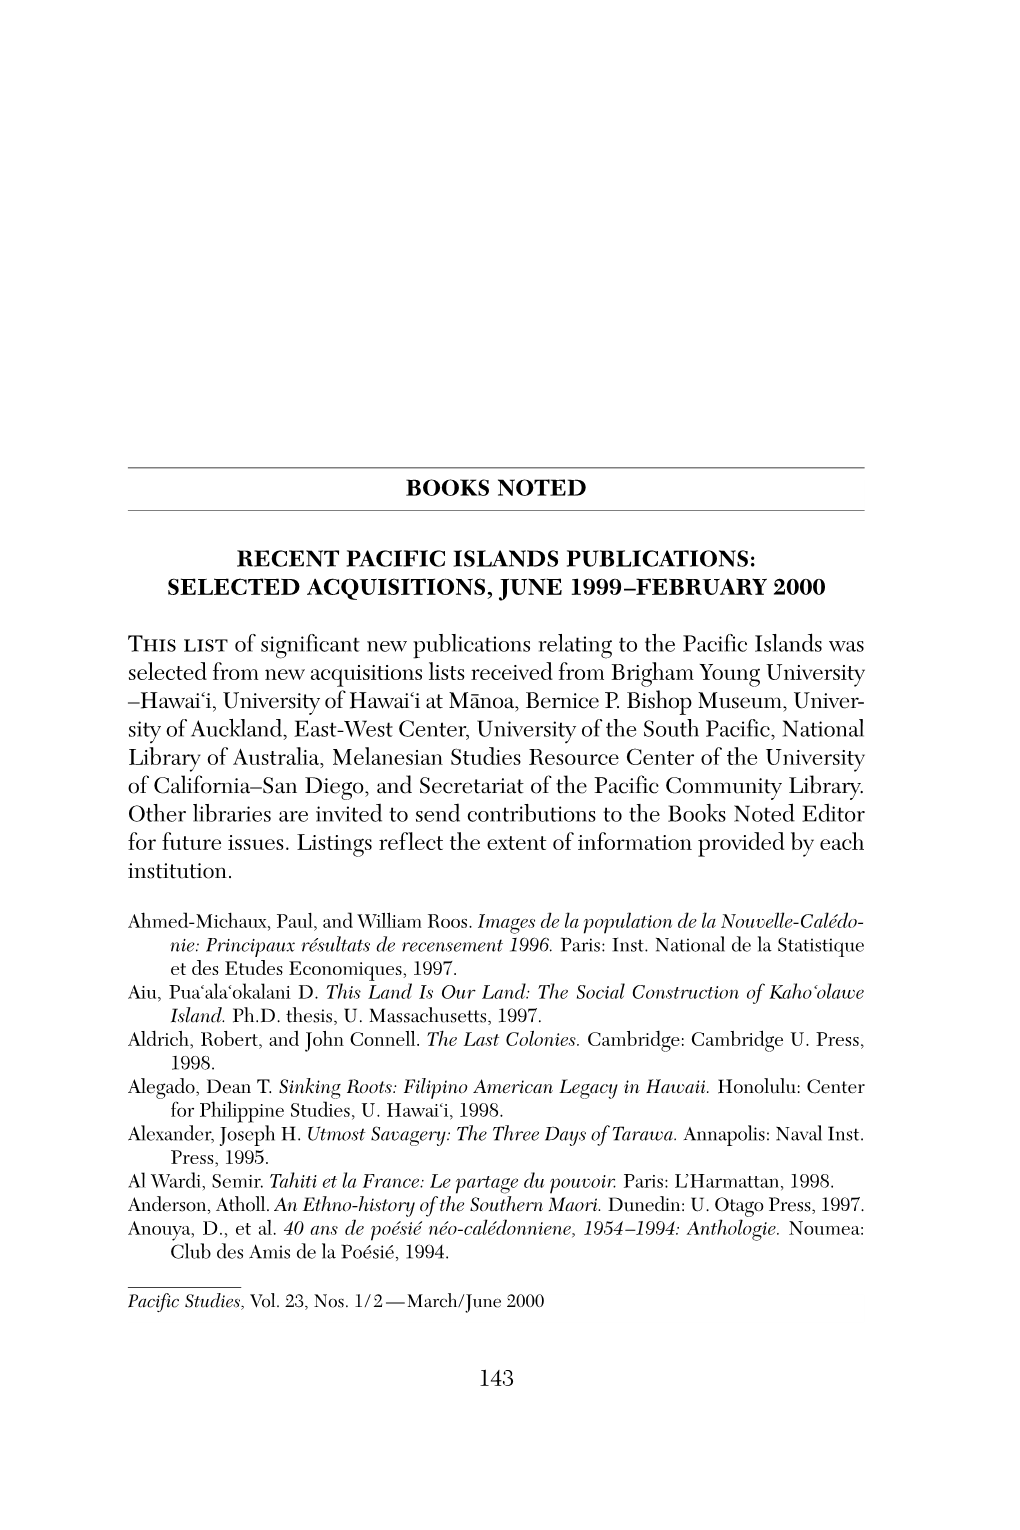 Recent Pacific Islands Publications: Selected Acquistions, June 1999